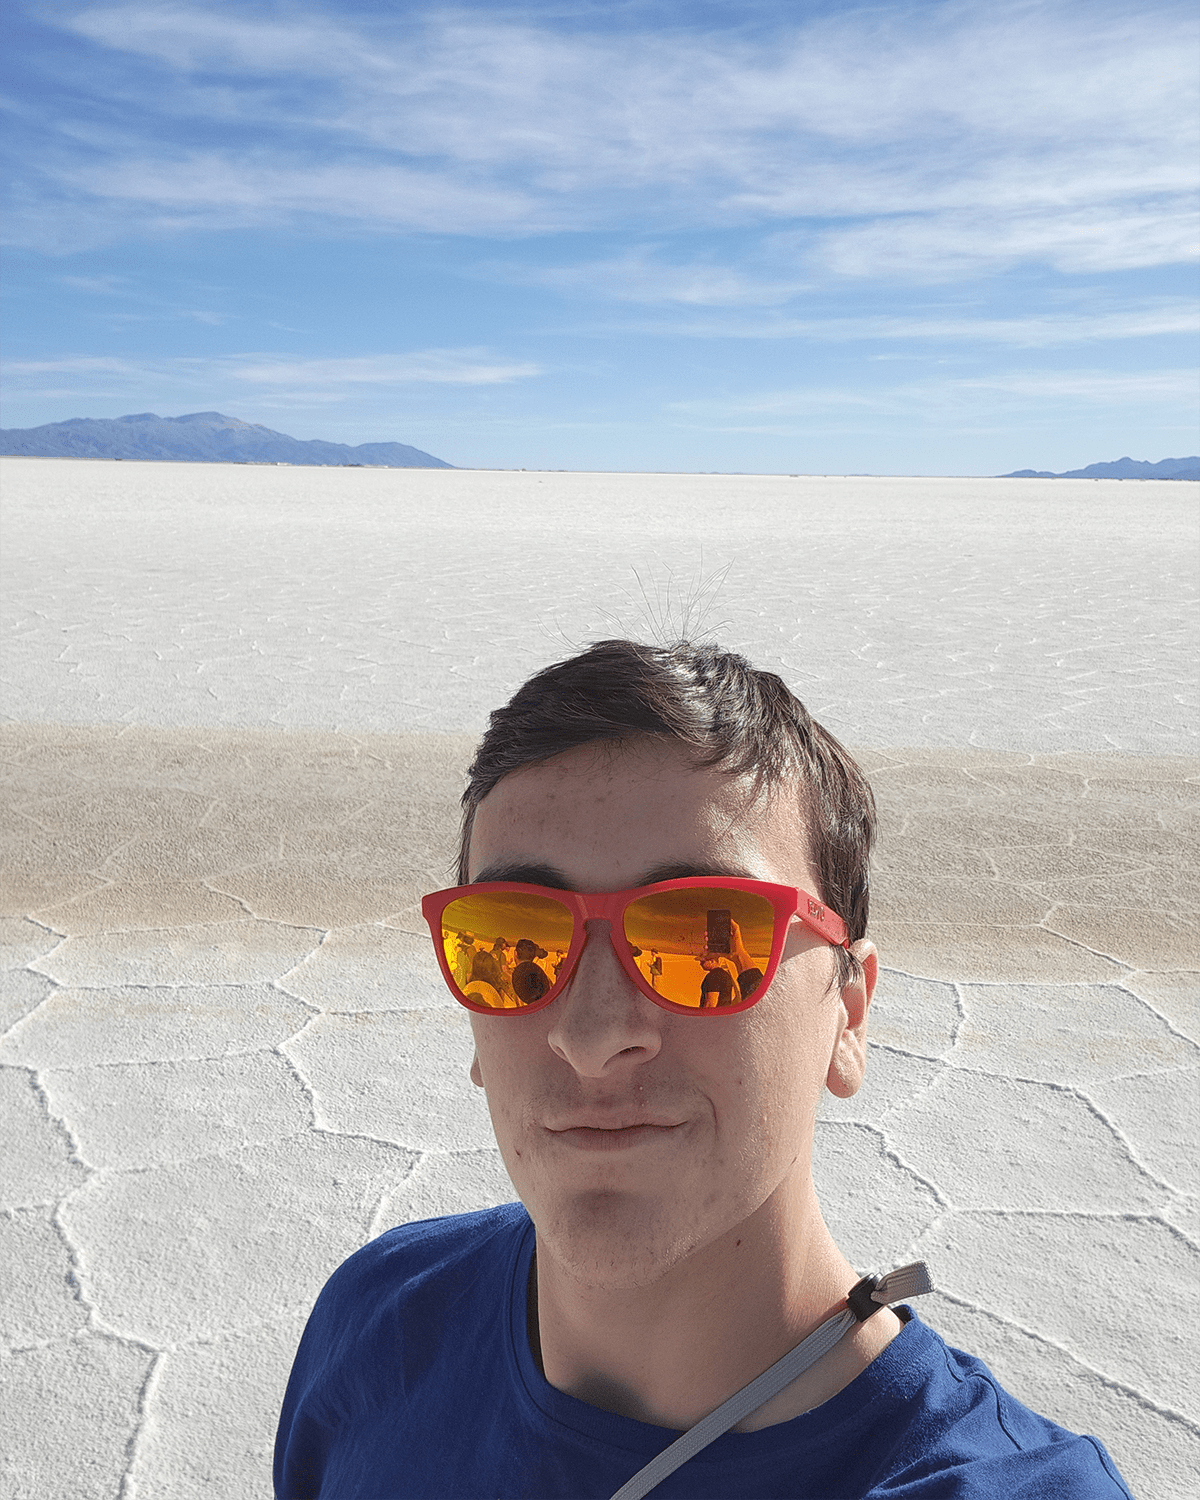 Zackrey poses wearing bright orange sunglasses in front of an empty expanse of dry, cracked earth.